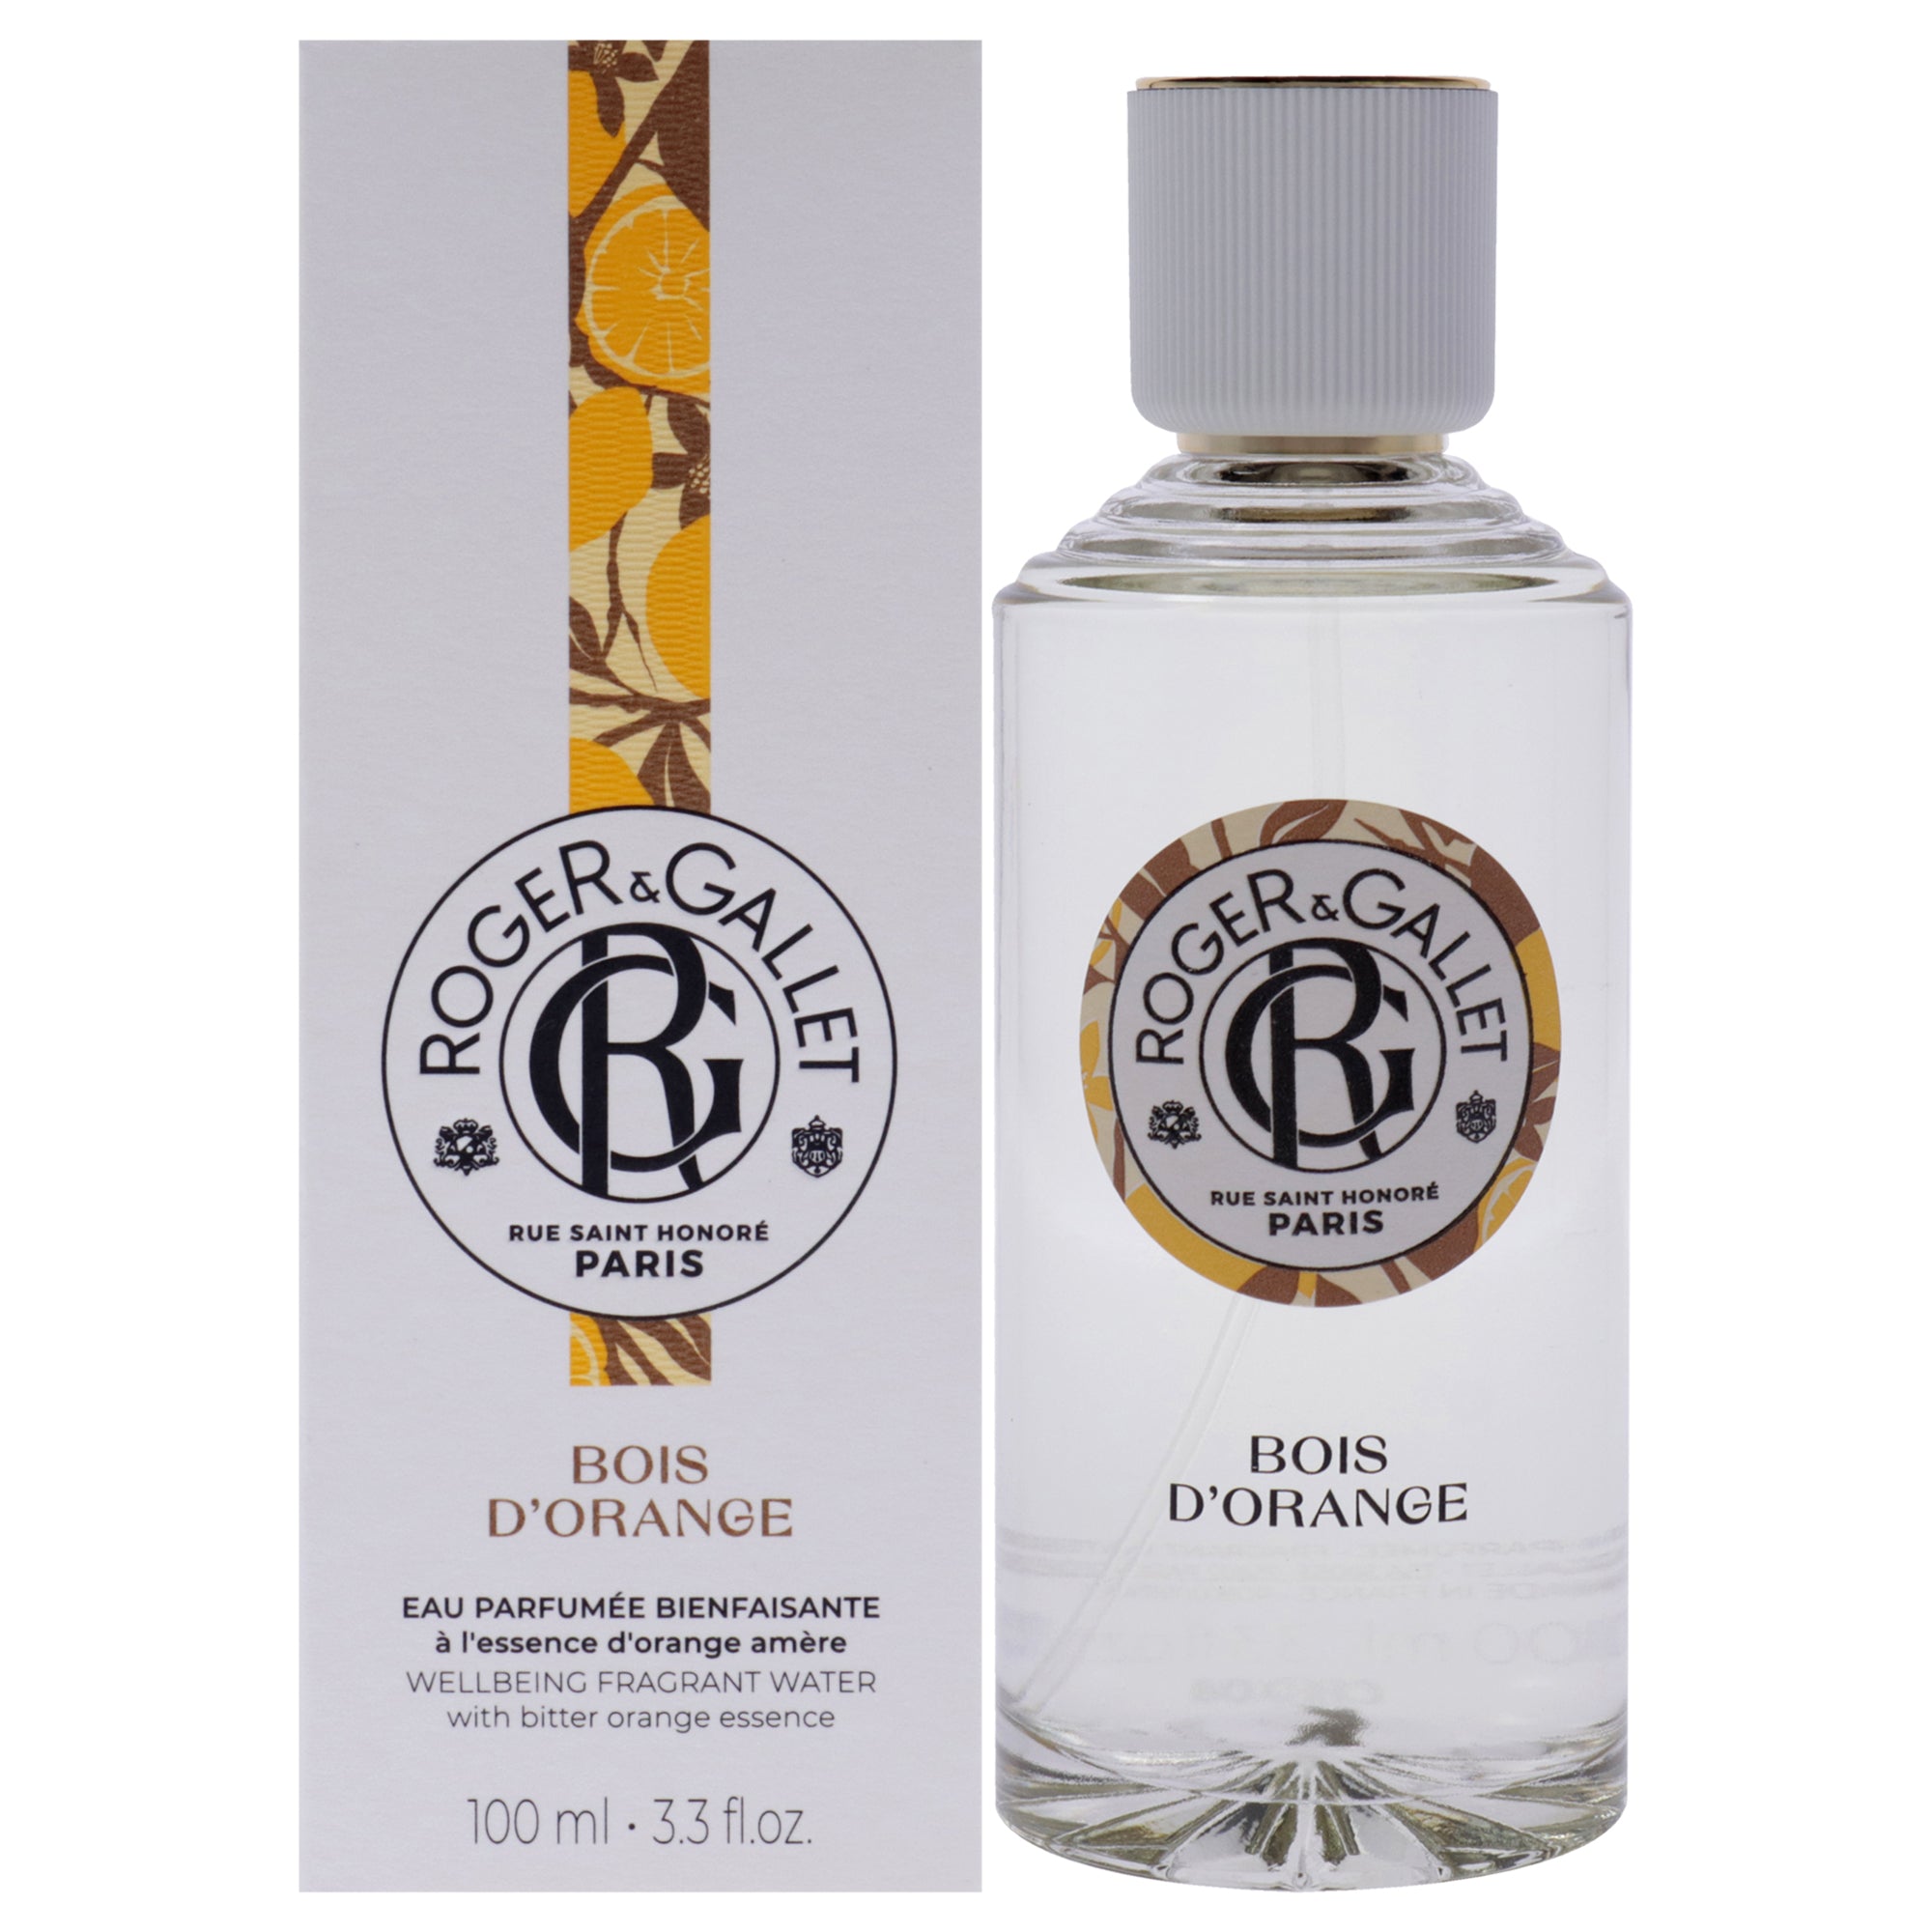 Wellbeing Fragrant Water - Orange Wood by Roger & Gallet for Unisex - 3.3 oz Spray